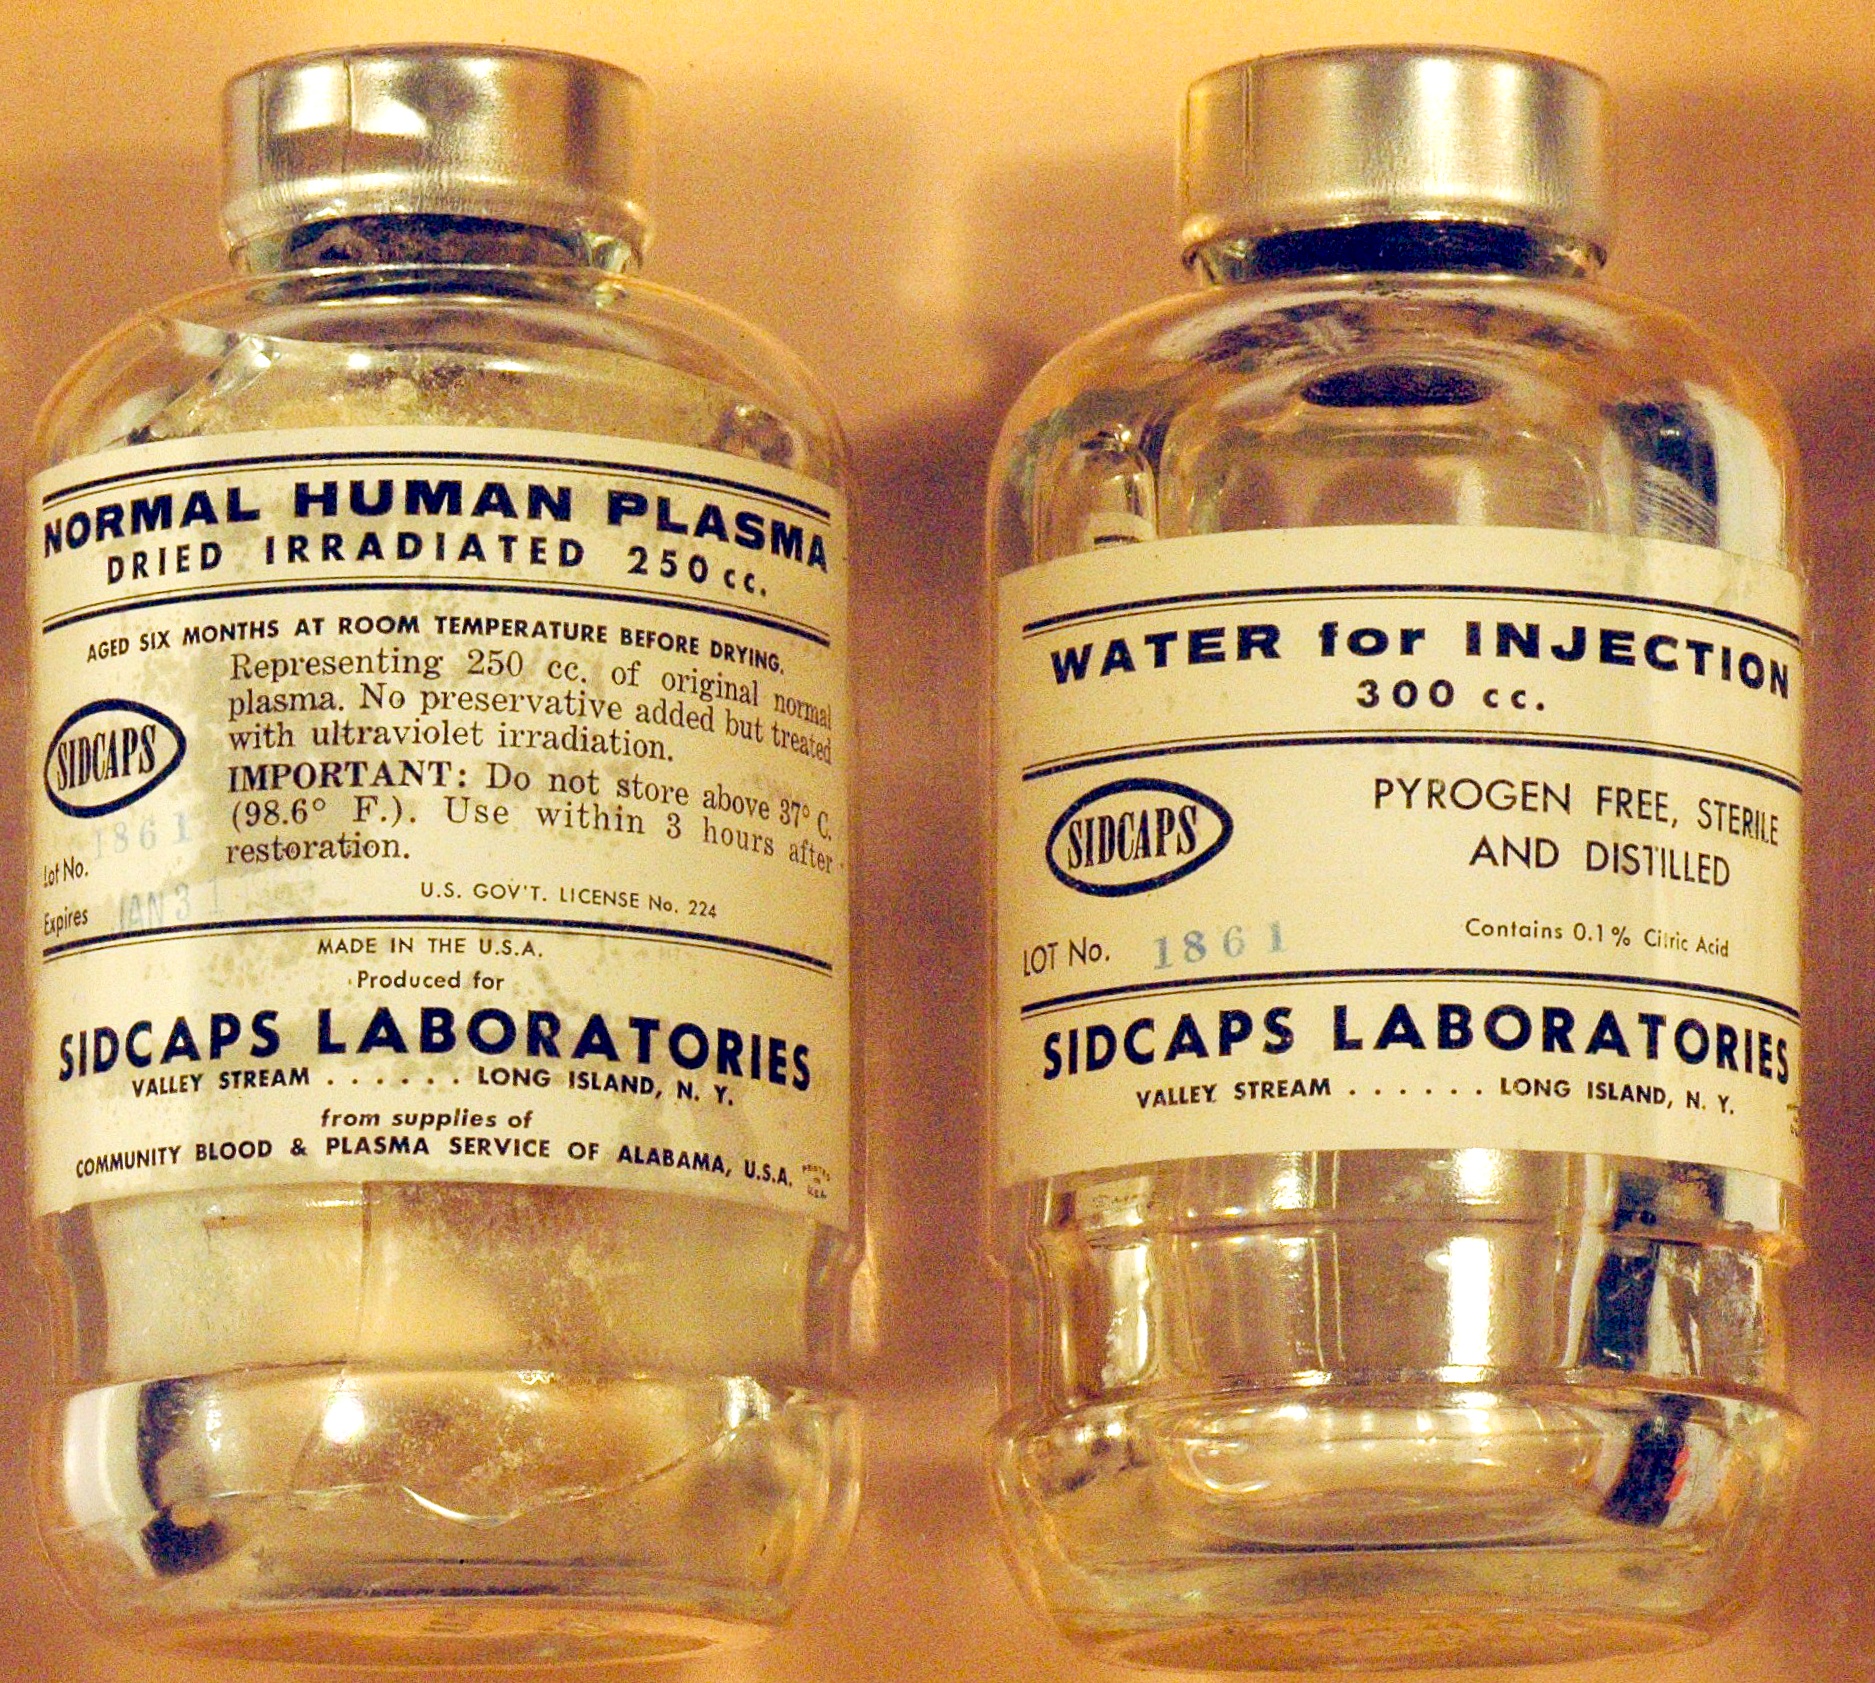 two glass vials, one of human plasma and one of water for injecting. Both from the 1960s, with Sidcaps Laboratories name on them.